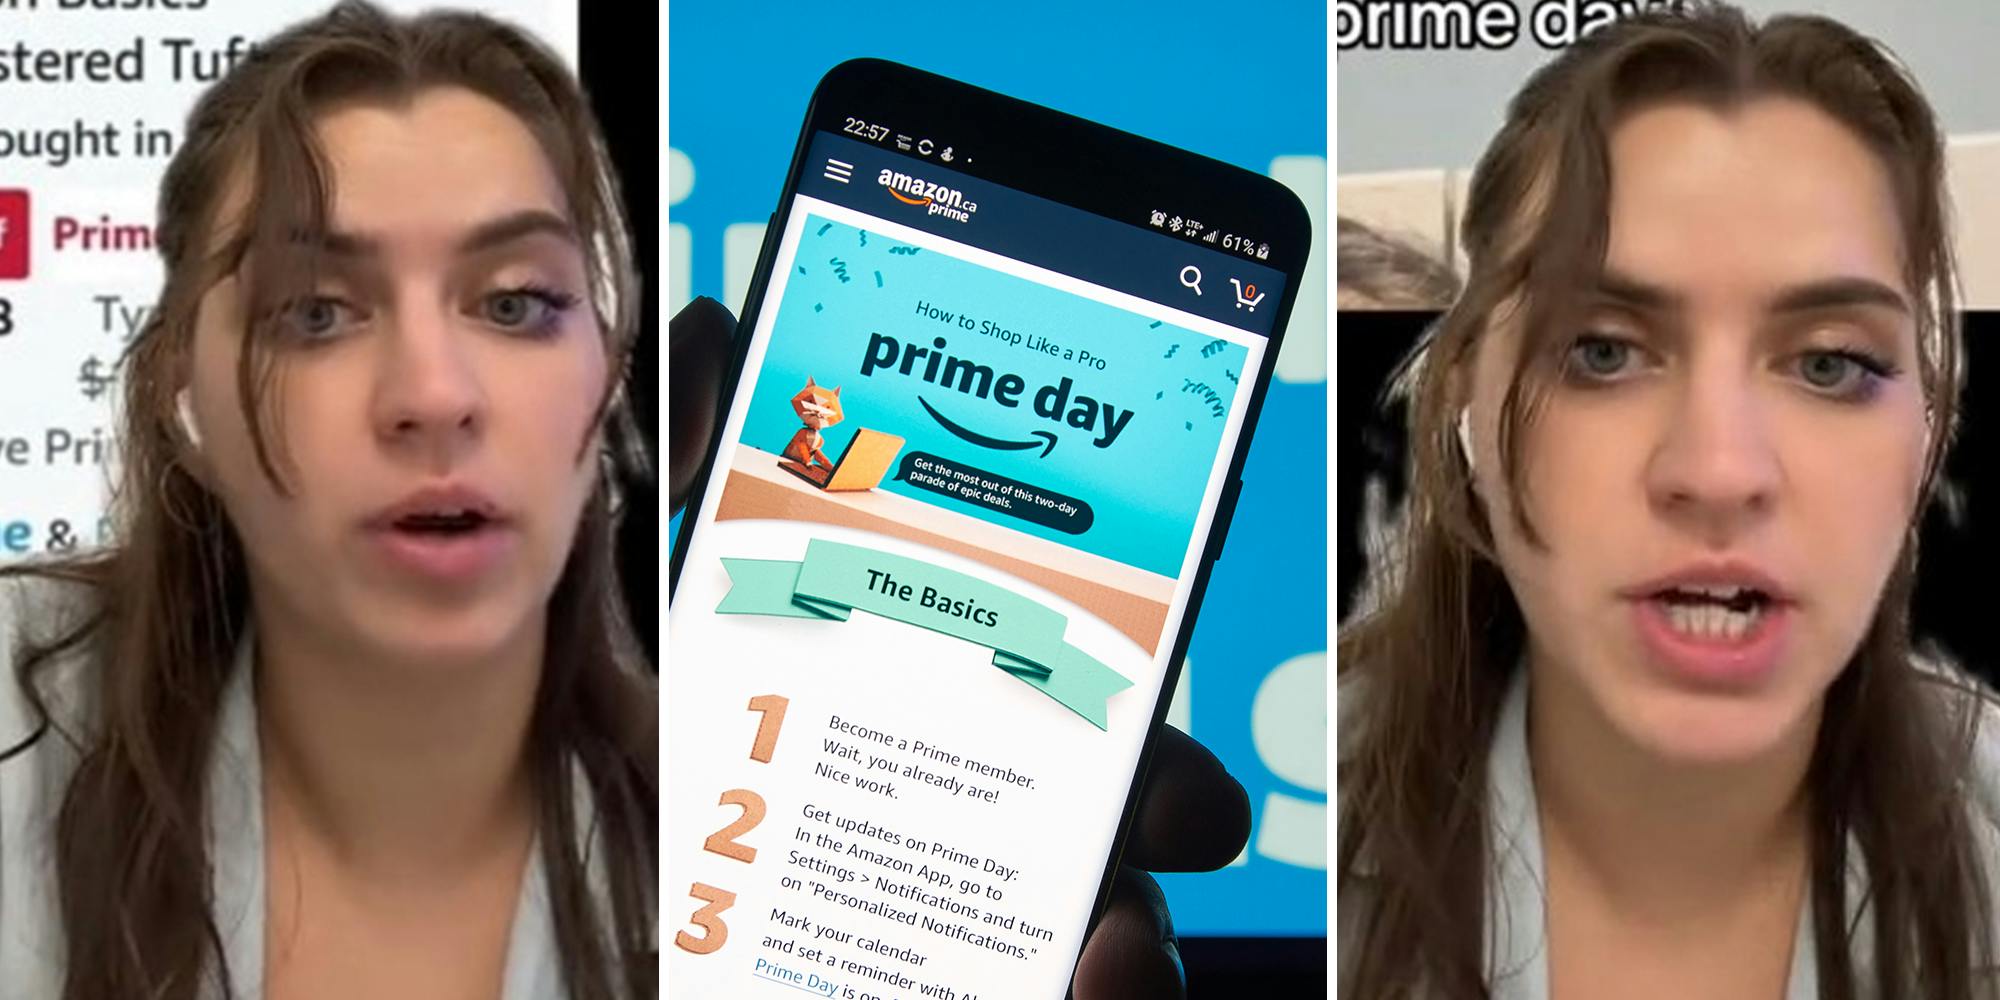 Woman calls out Amazon for false advertising following Prime Day 'scam'